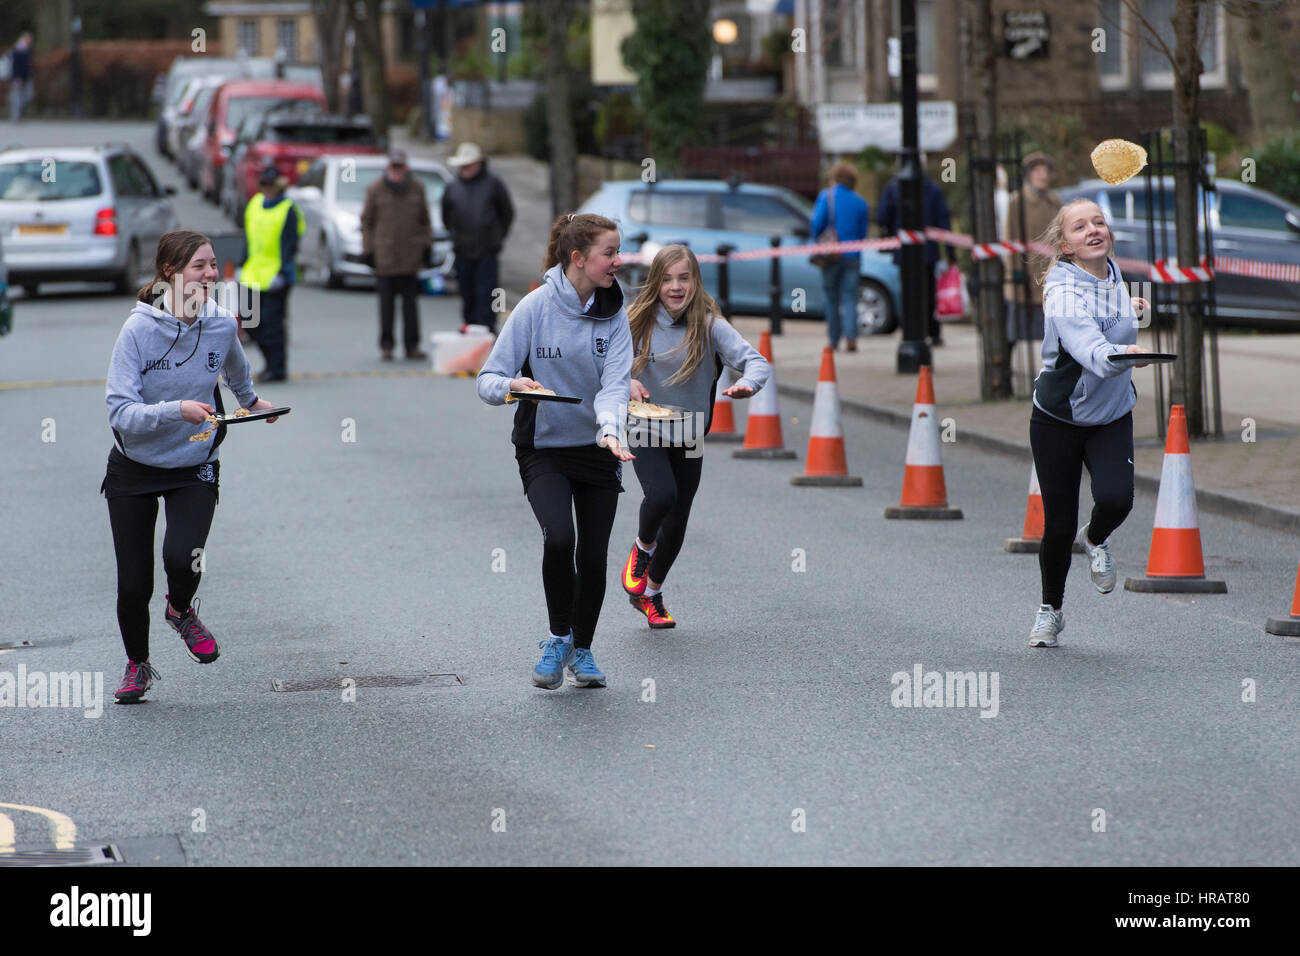 The Grove, Ilkley, West Yorkshire, UK. 28th Feb, 2017. Young female competitors (school girls) are running and taking part in the traditional, annual Ilkley Rotary Pancake Race. Credit: Ian Lamond/Alamy Live News Stock Photo